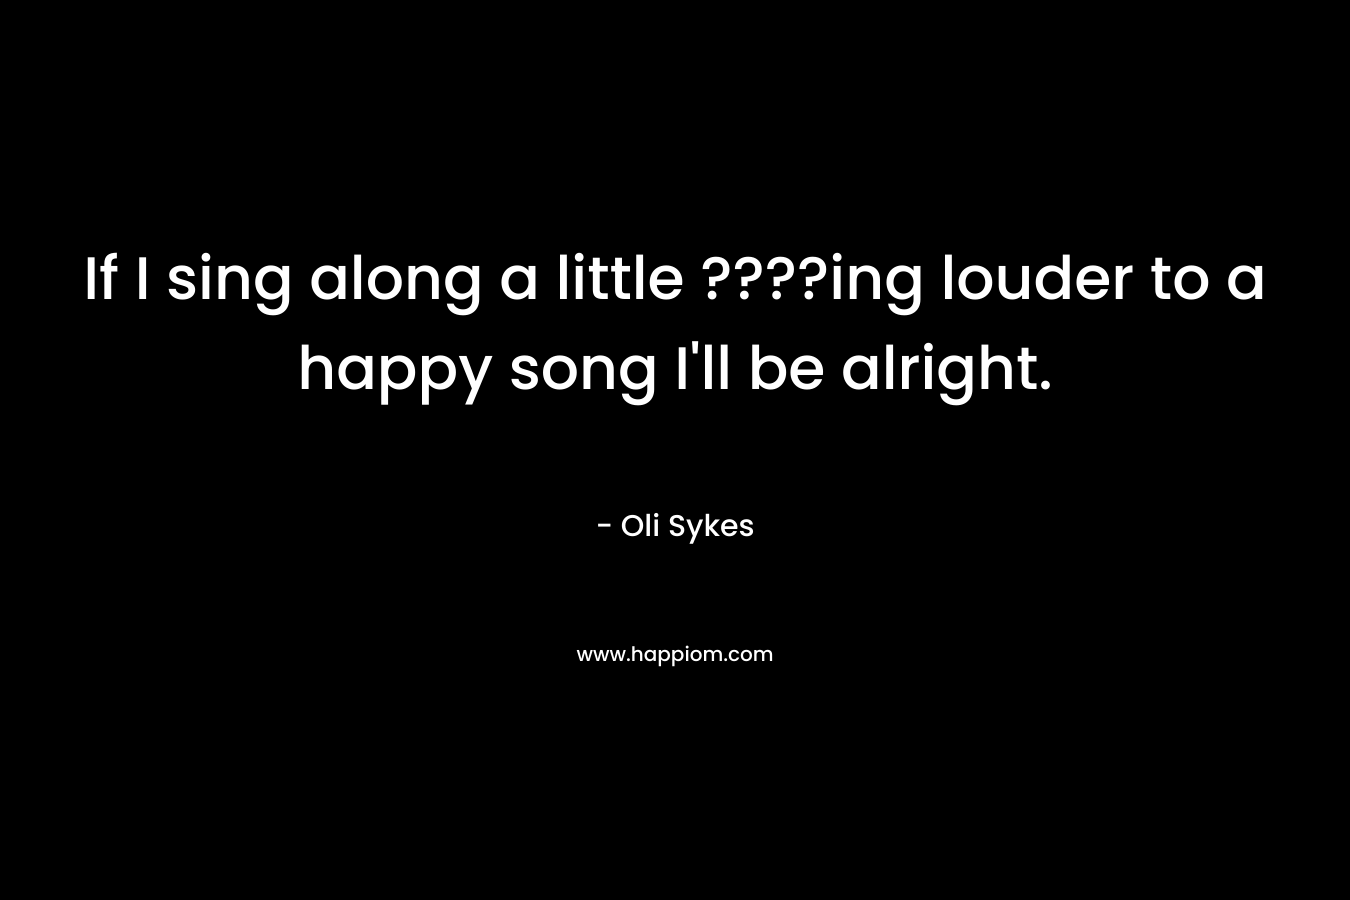 If I sing along a little ????ing louder to a happy song I'll be alright.